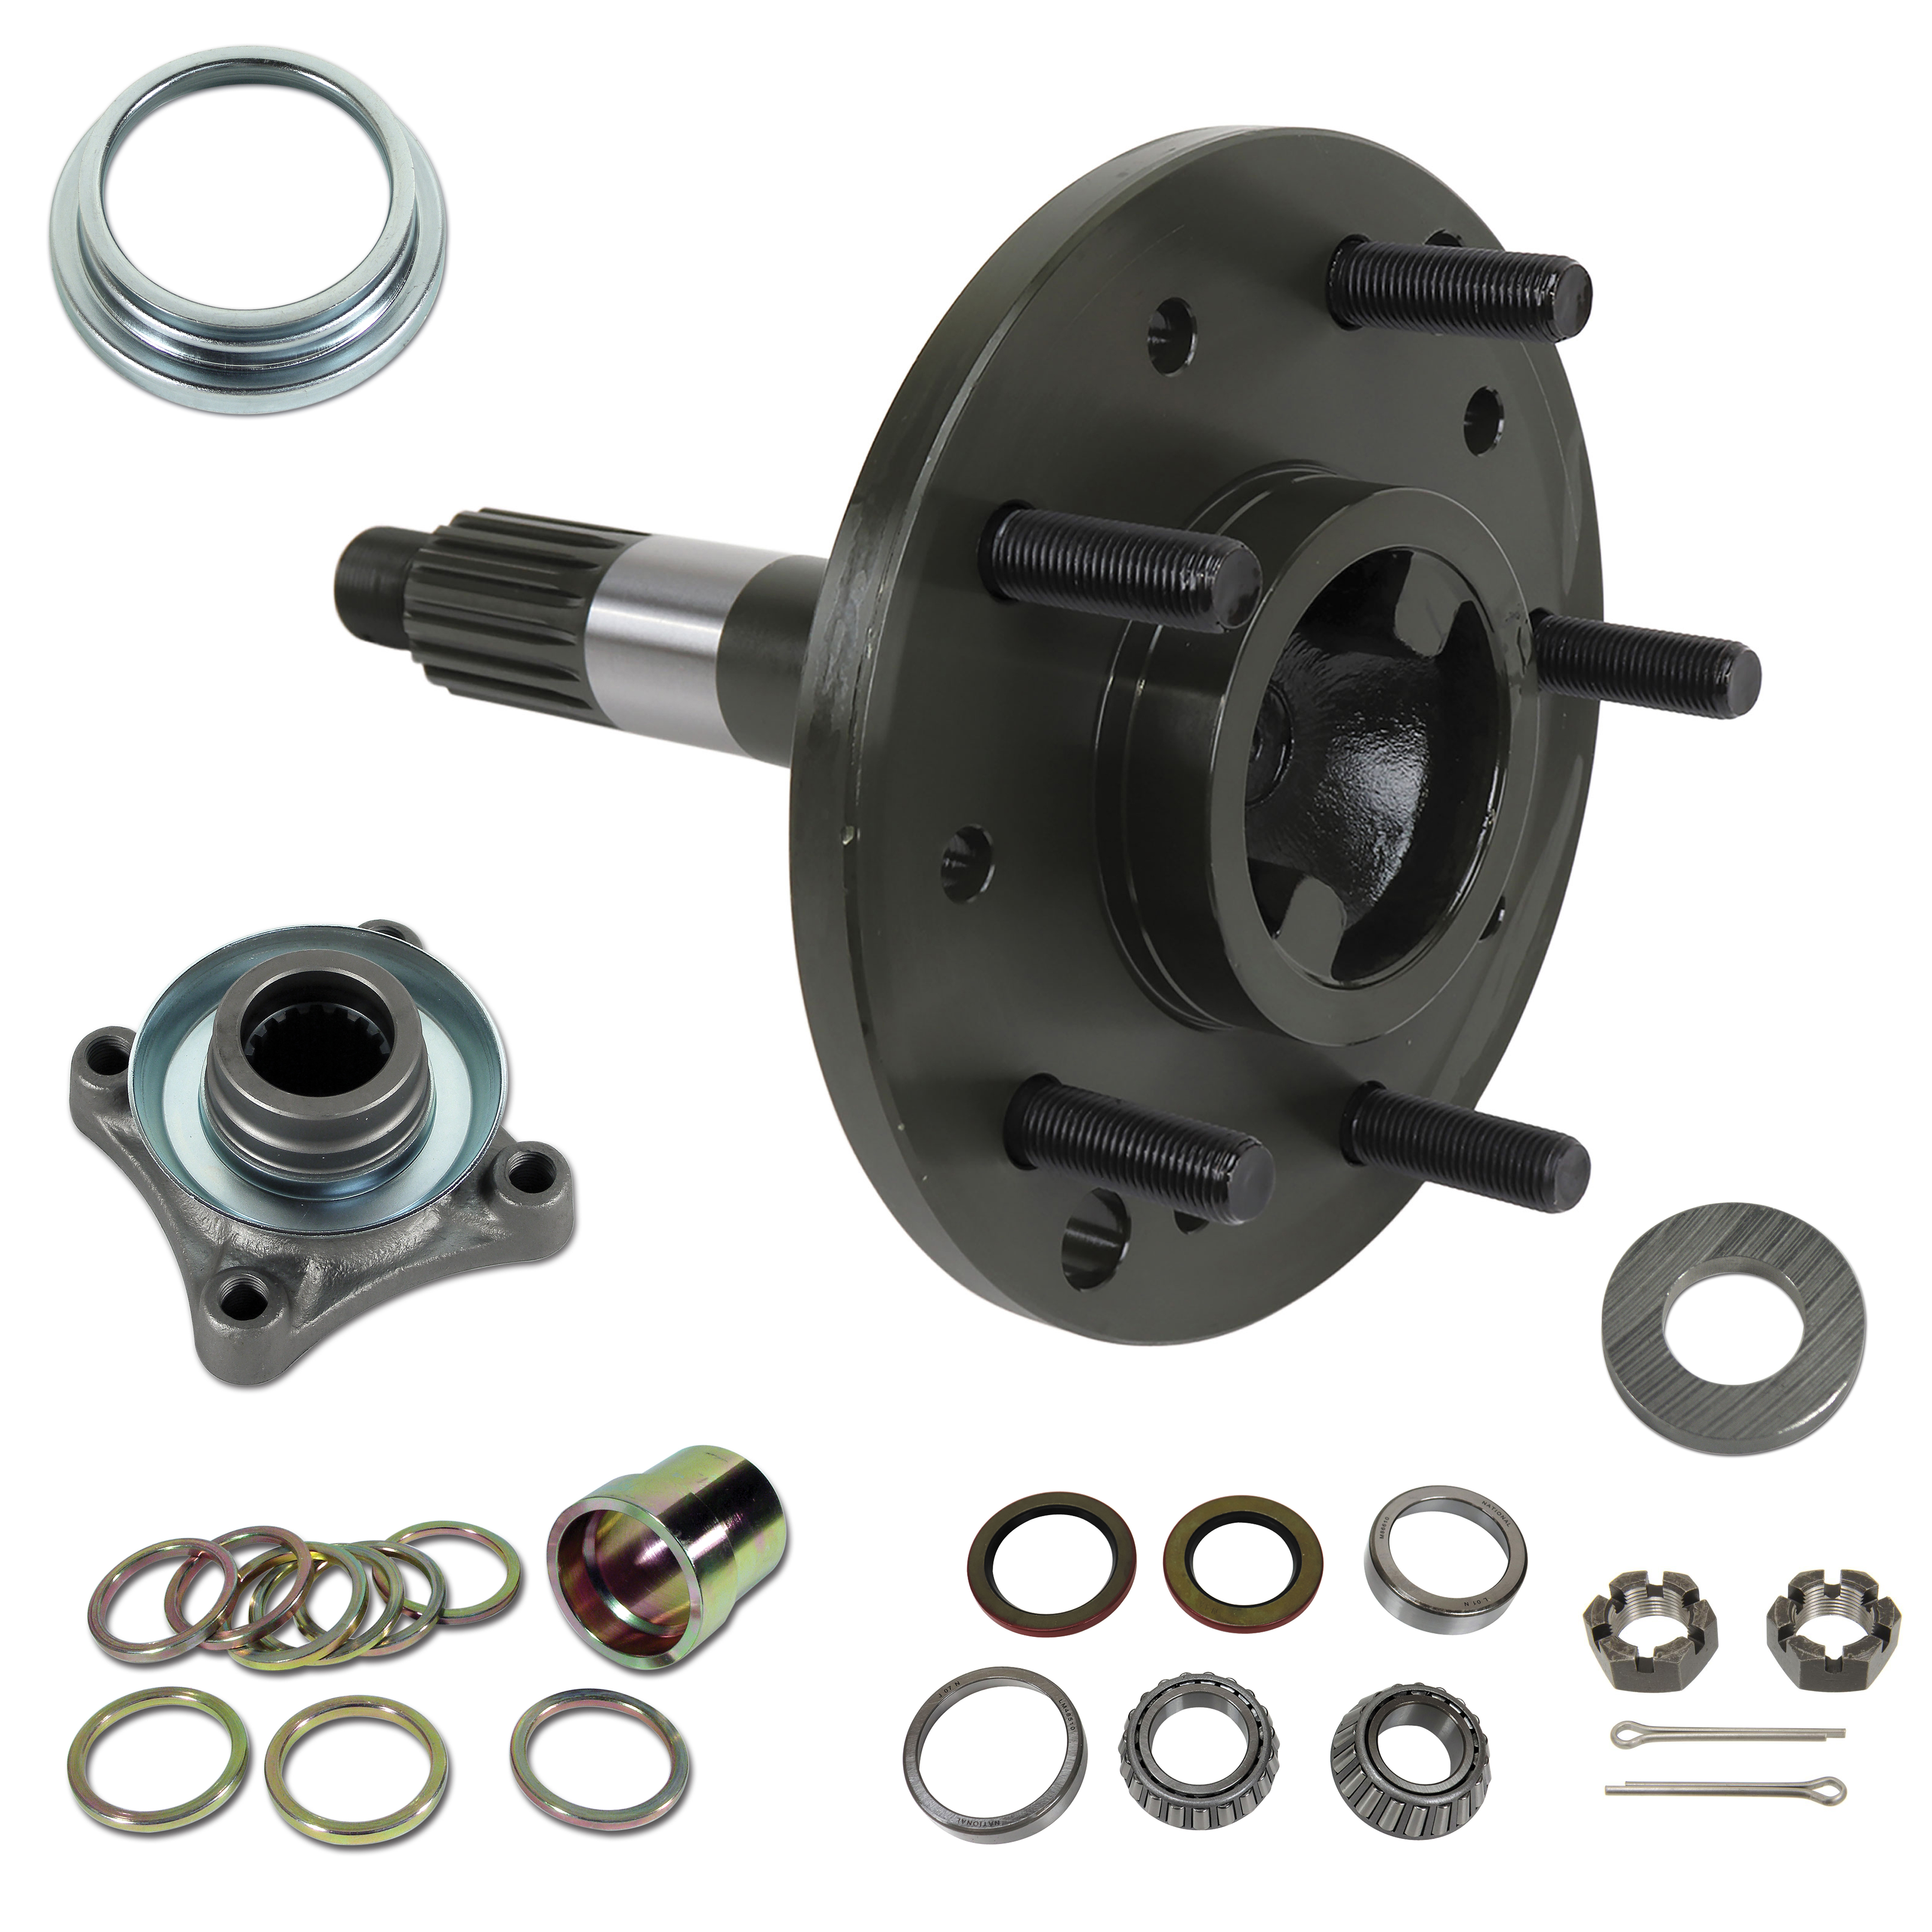 1965-1982 C3 Corvette Rear Spindle Refresh Kit W/New Spindle, Bearings, Shims & Seals